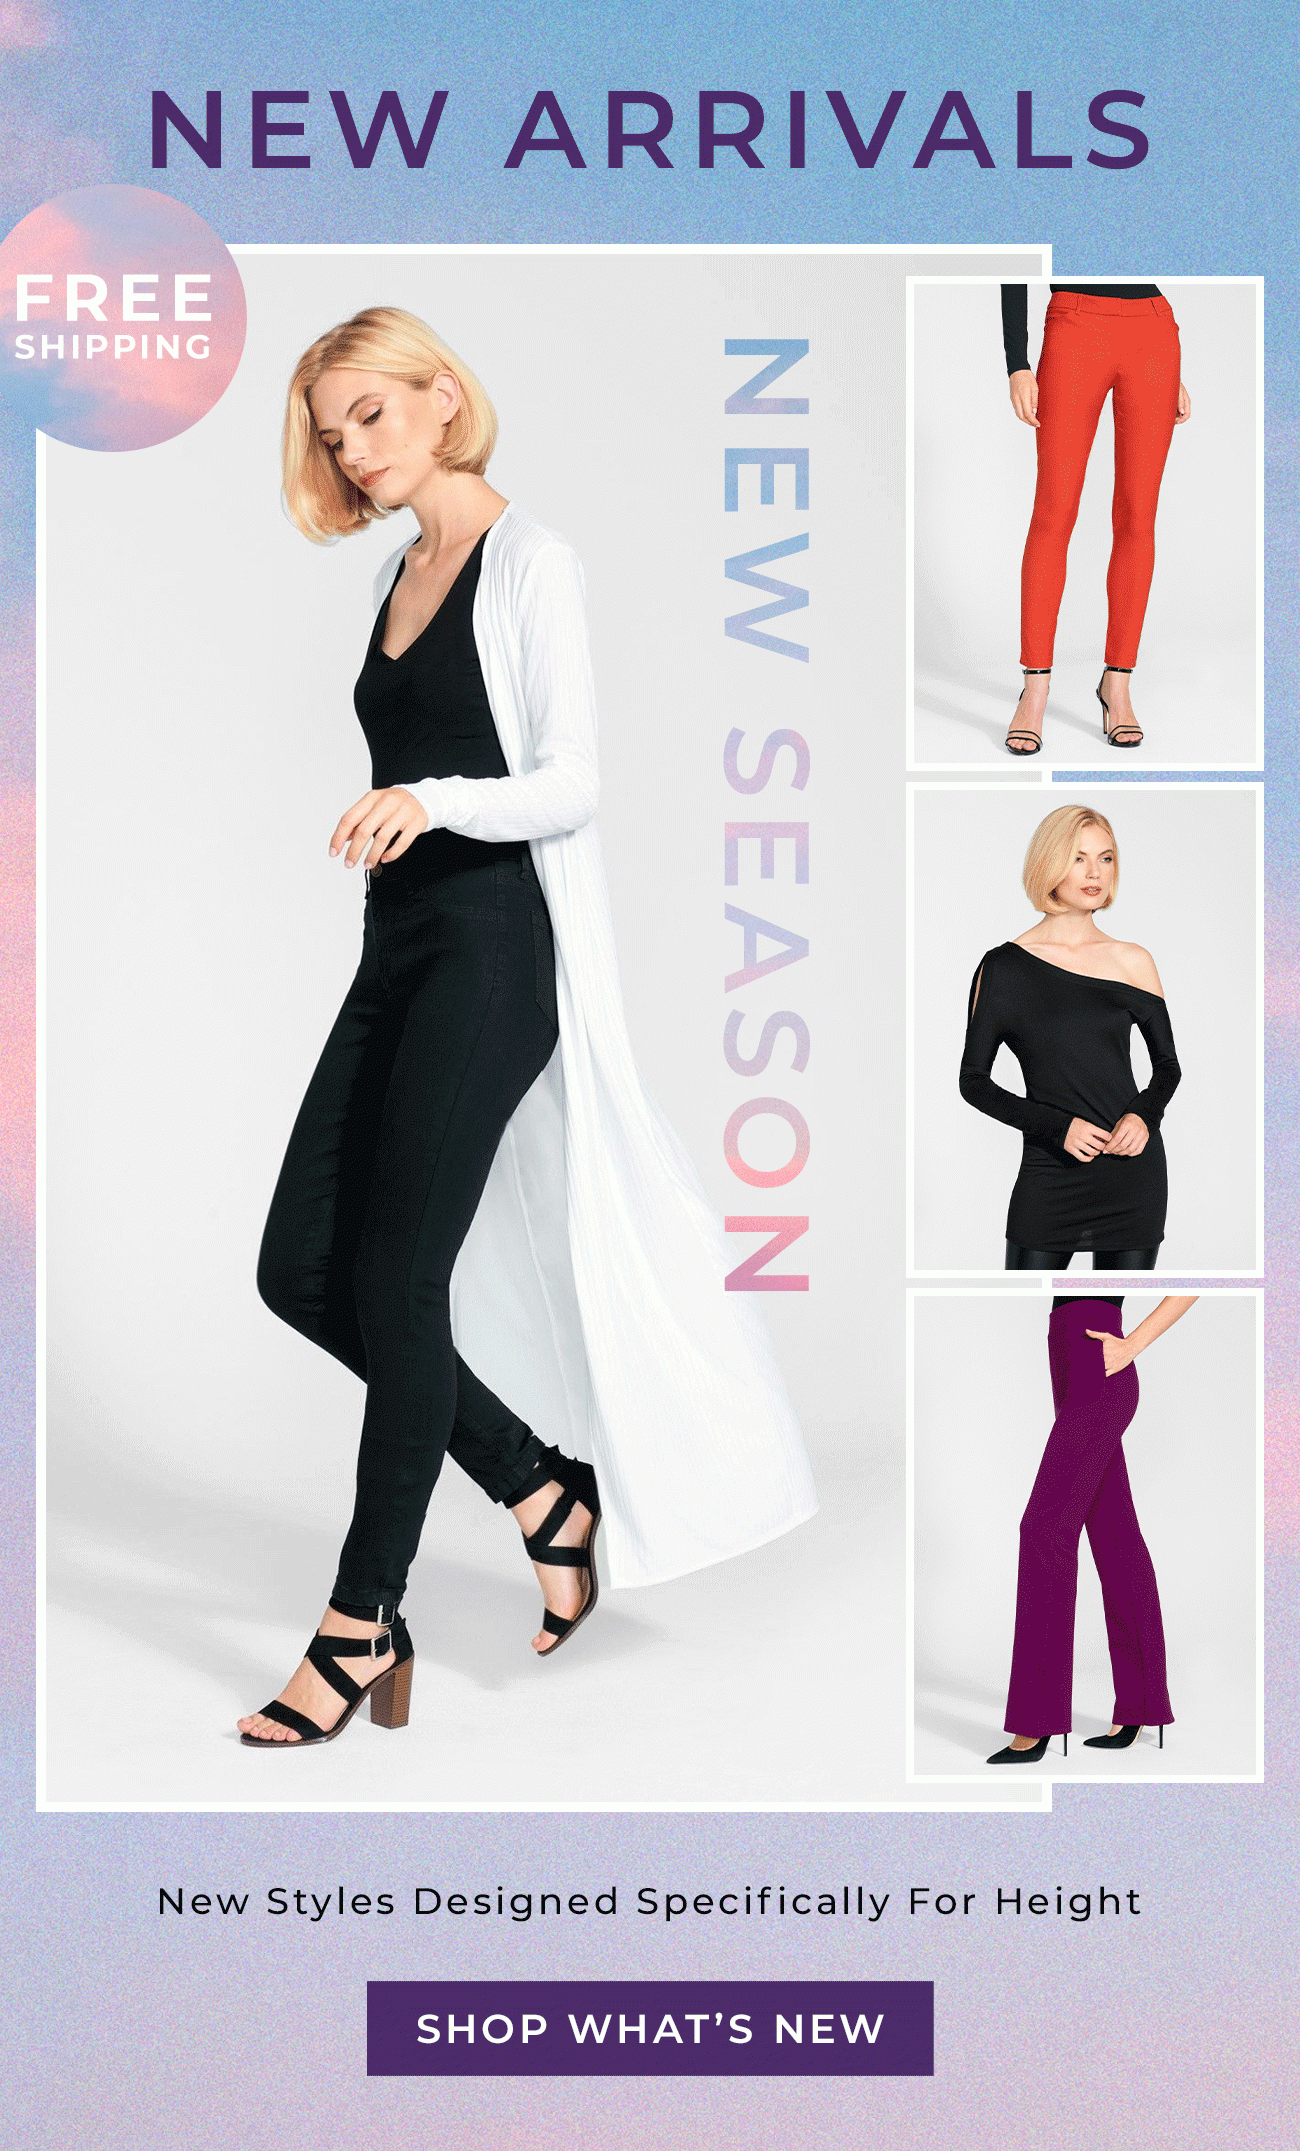 New Season (vertical) New Arrivals (horizontal) - New Styles Designed Specifically For Height